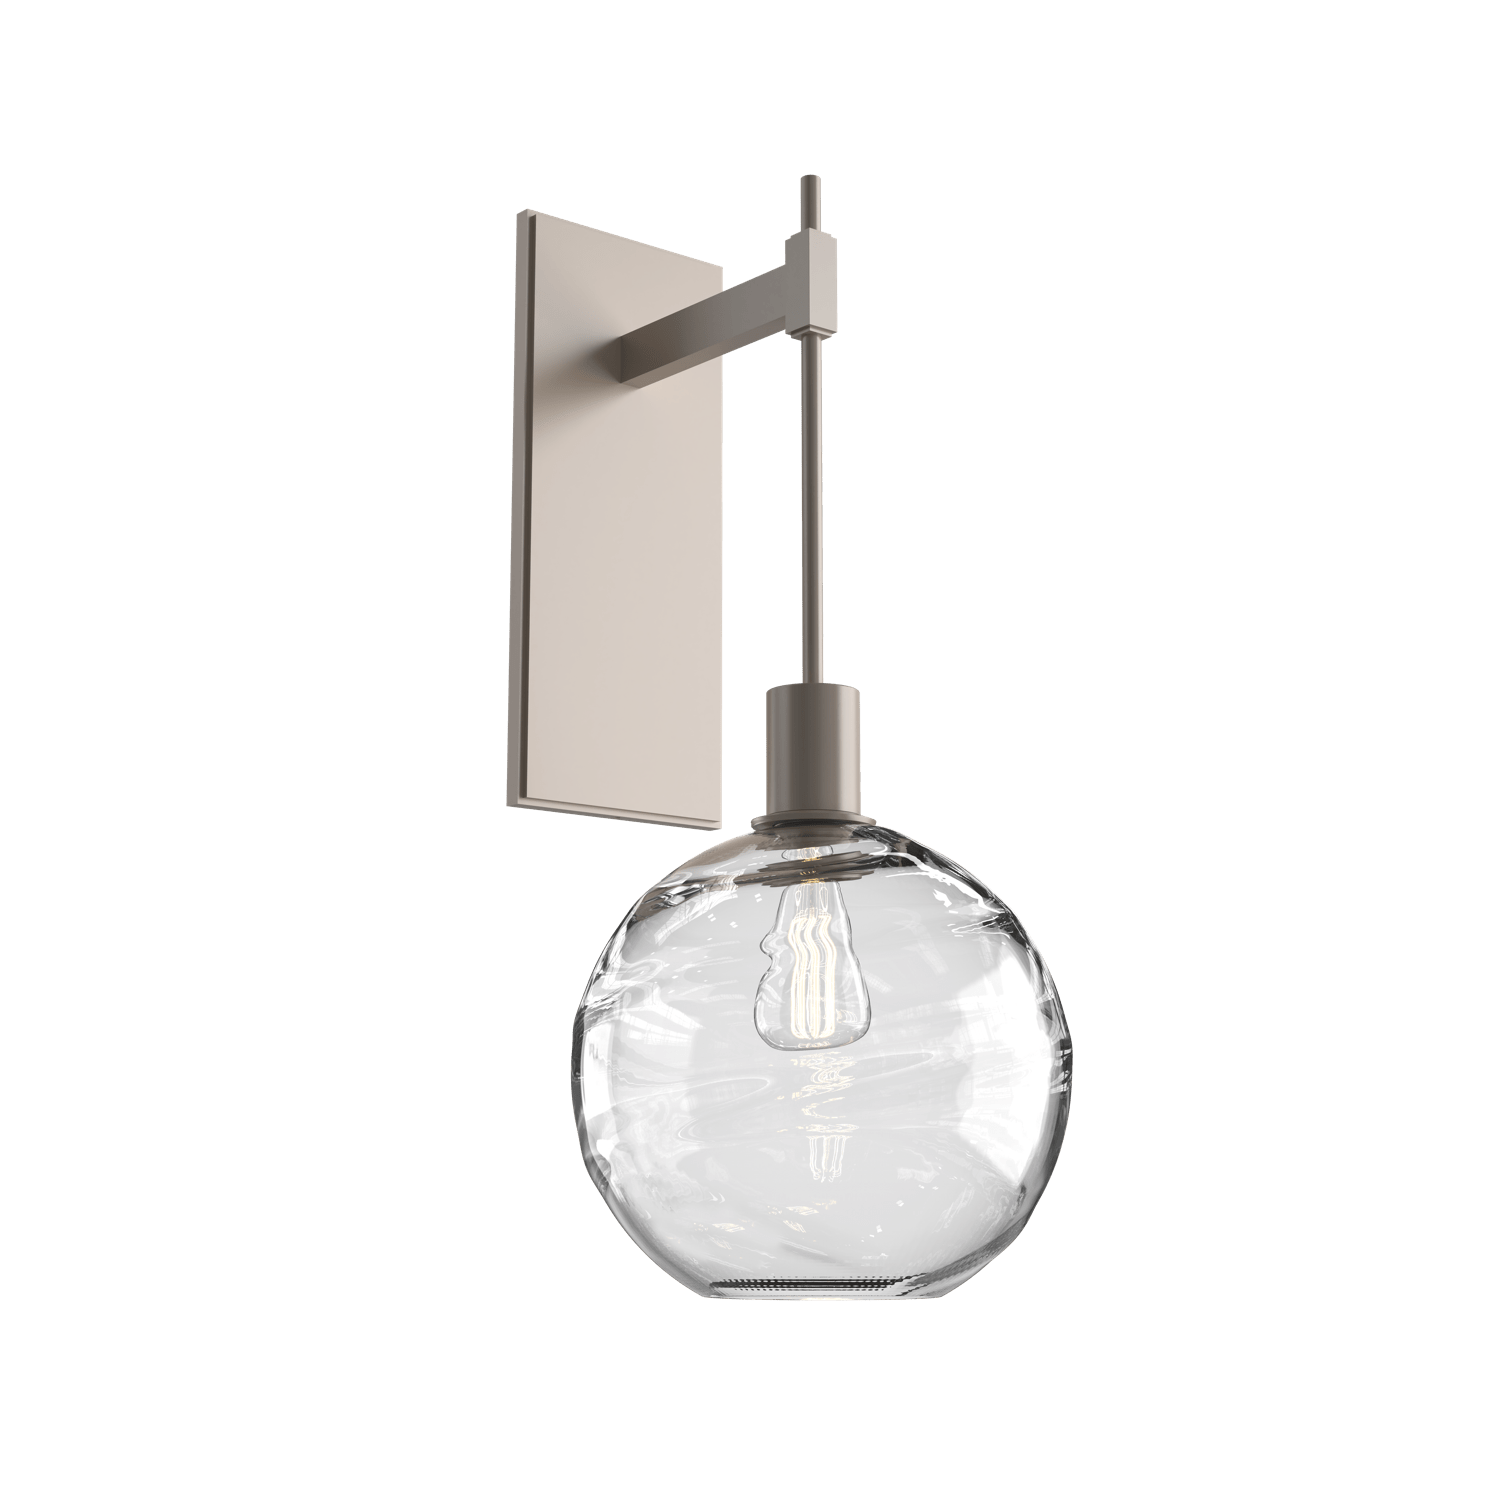 IDB0047-22-BS-OC-Hammerton-Studio-Optic-Blown-Glass-Terra-tempo-wall-sconce-with-metallic-beige-silver-finish-and-optic-clear-blown-glass-shades-and-incandescent-lamping